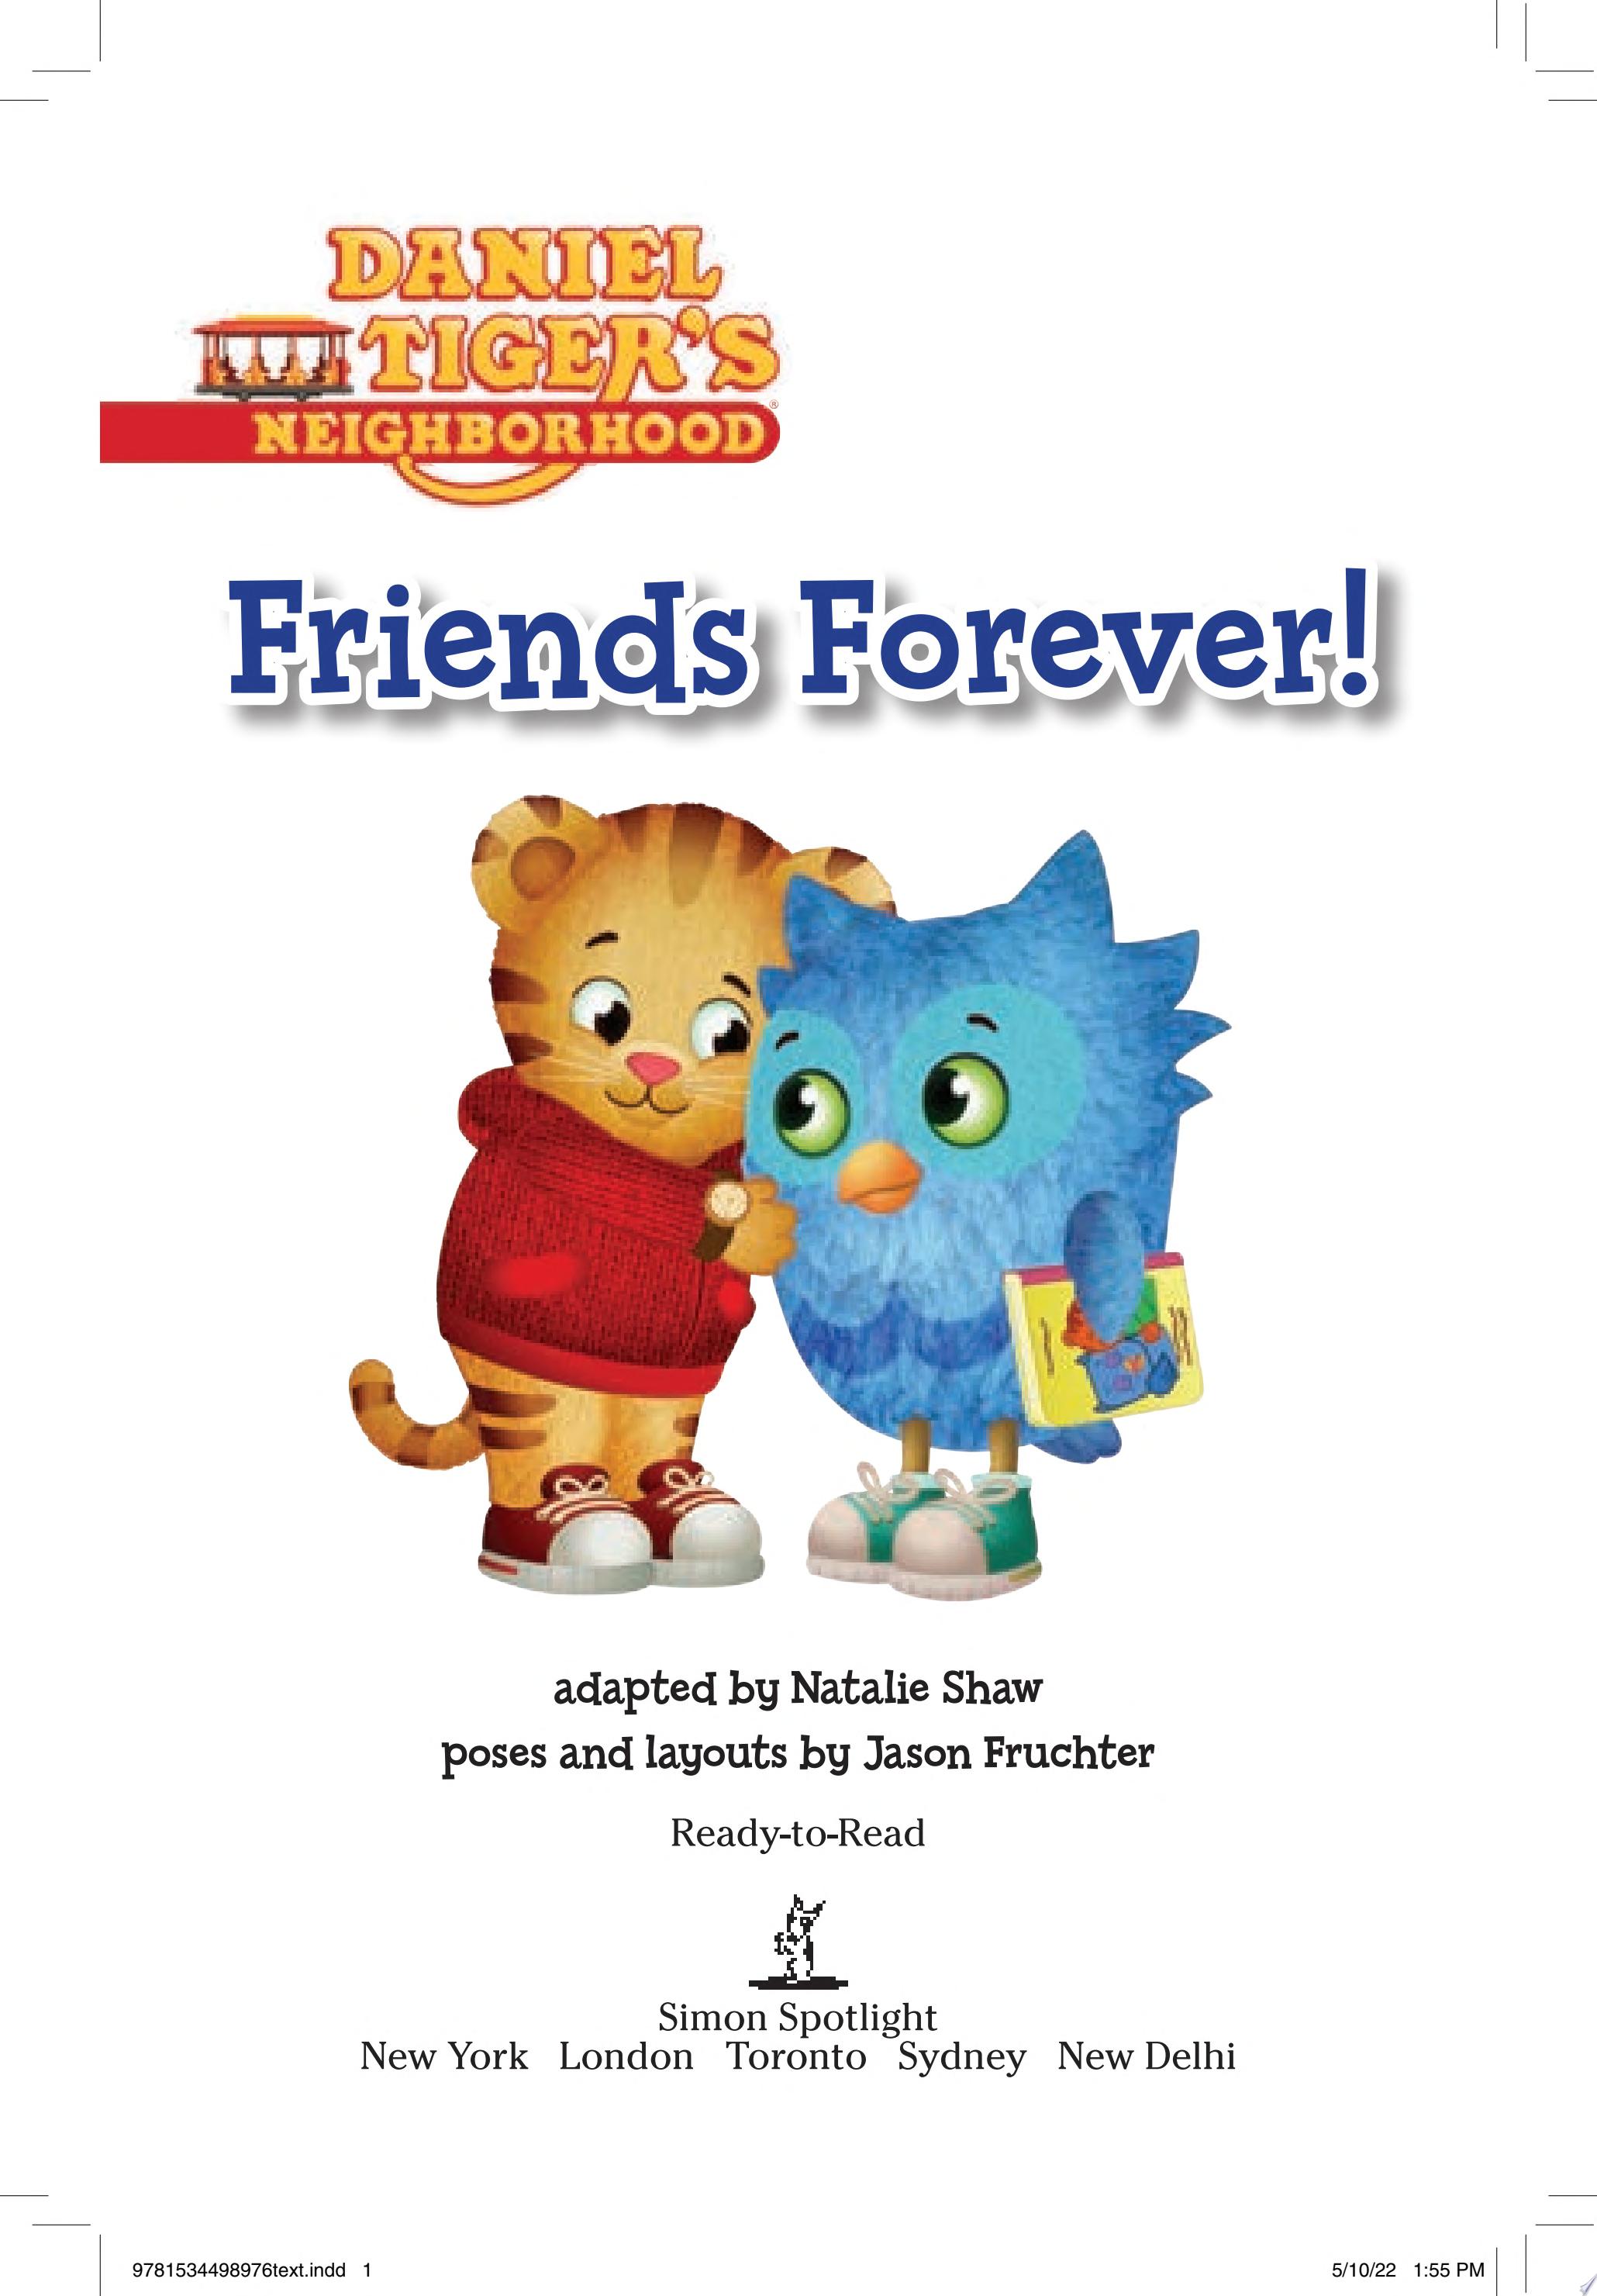 Image for "Friends Forever!"